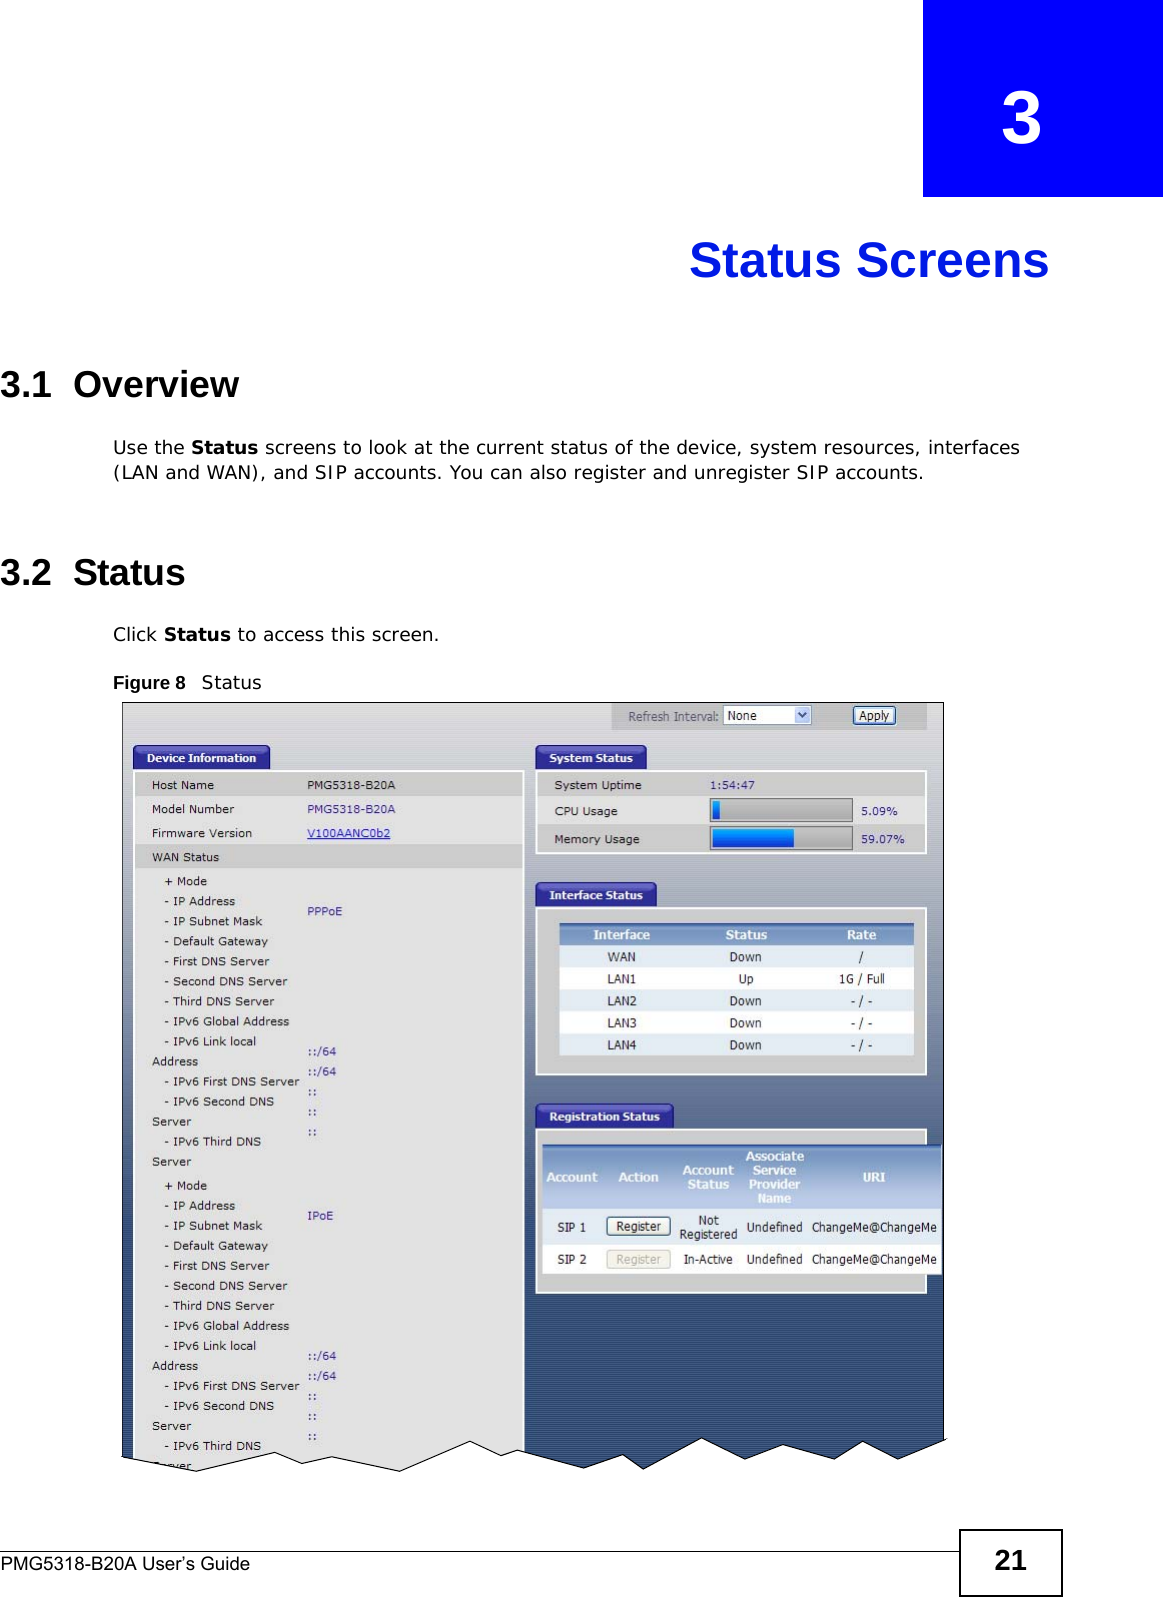 PMG5318-B20A User’s Guide 21CHAPTER   3Status Screens3.1  OverviewUse the Status screens to look at the current status of the device, system resources, interfaces (LAN and WAN), and SIP accounts. You can also register and unregister SIP accounts.3.2  StatusClick Status to access this screen. Figure 8   Status   